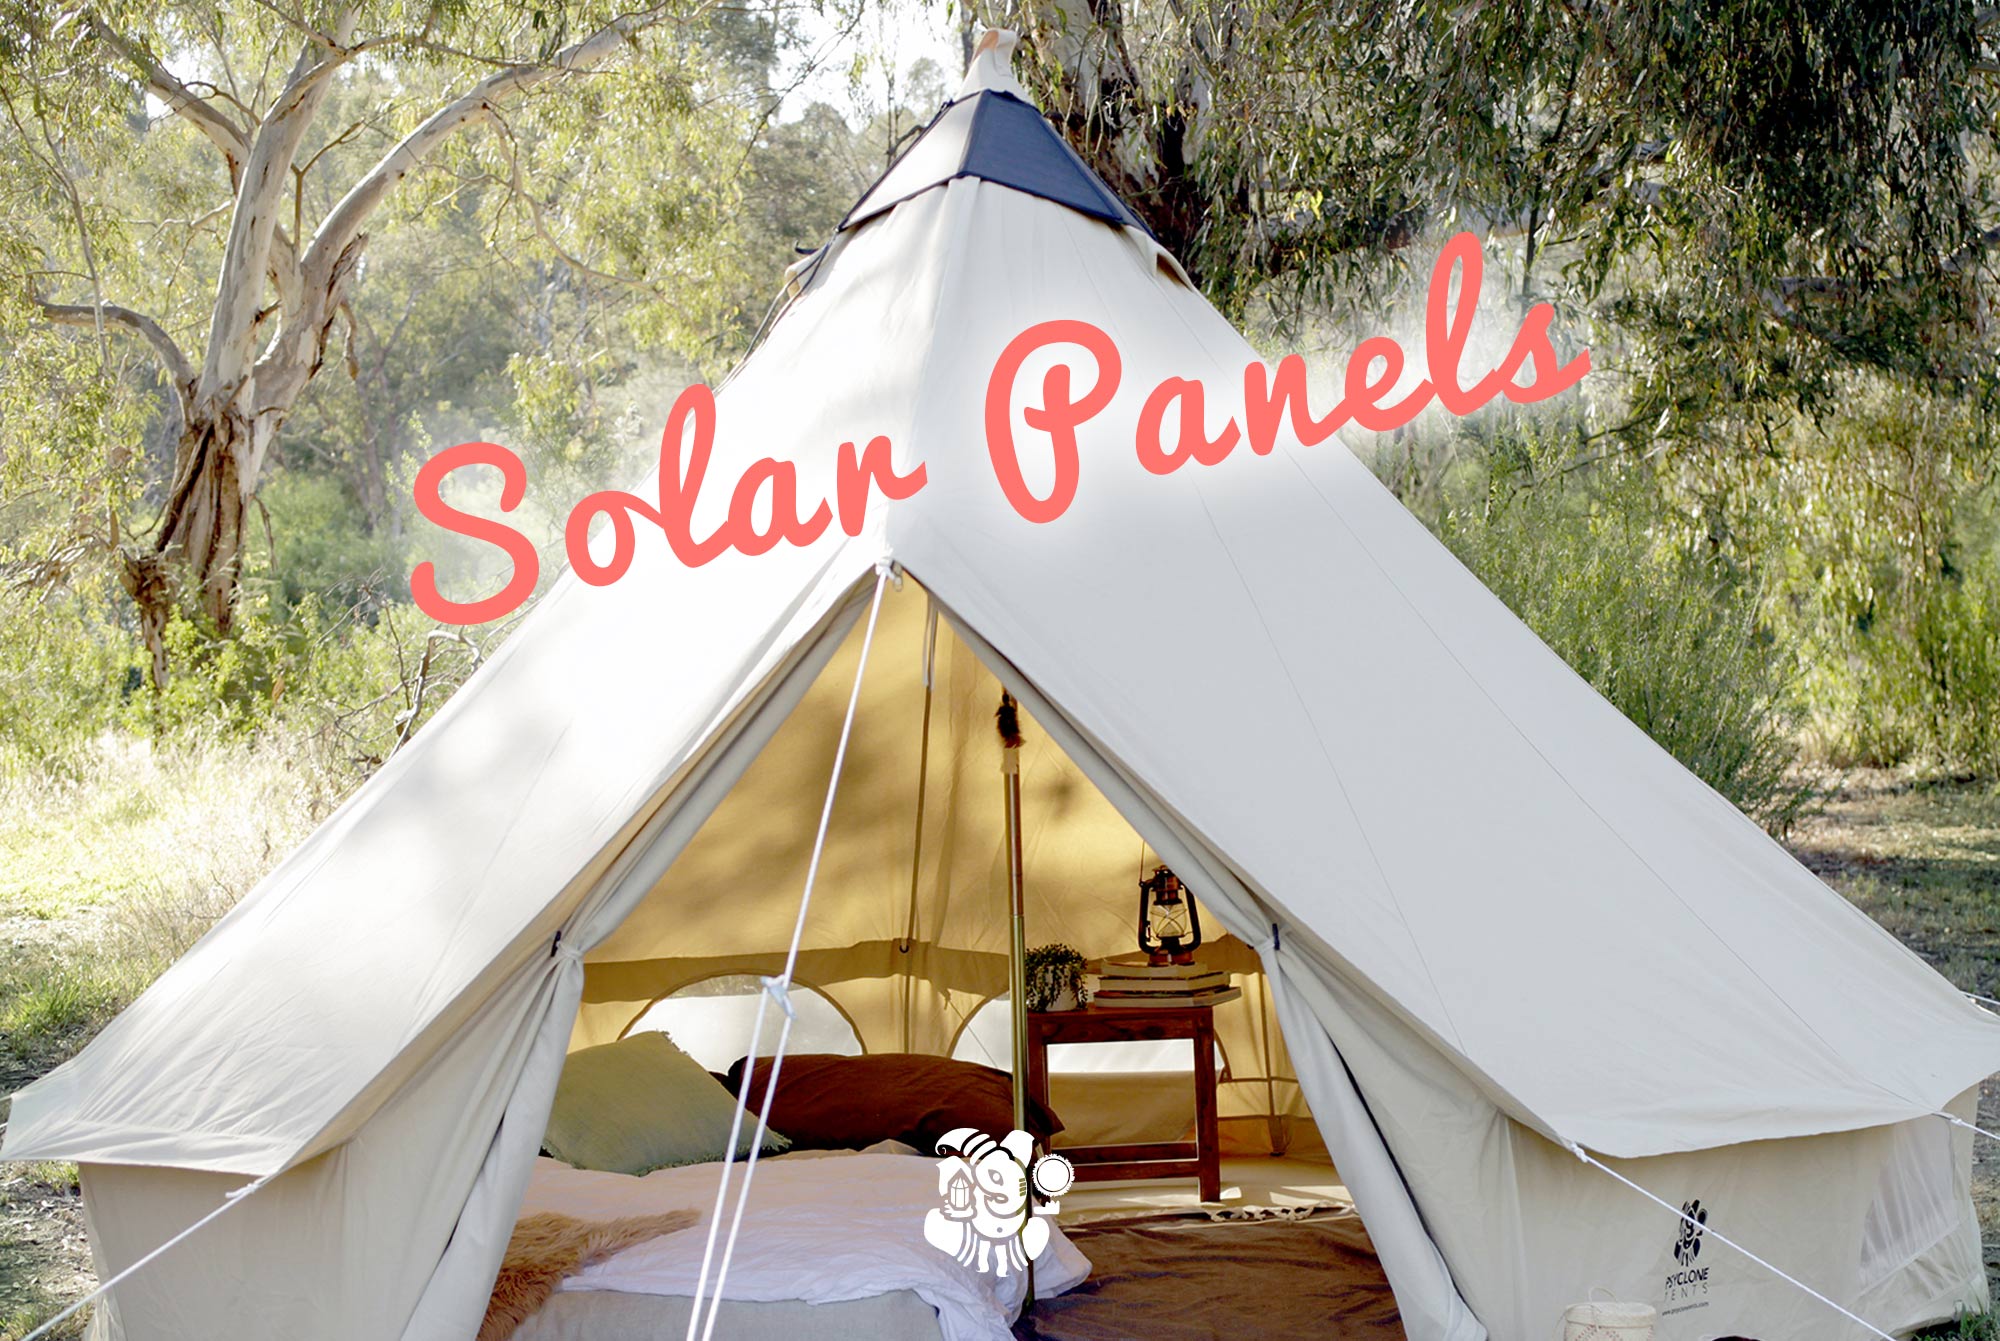 Vechter Versterken pindas Solar Panel for bell tents | Camping in style with Psyclone's solar charger